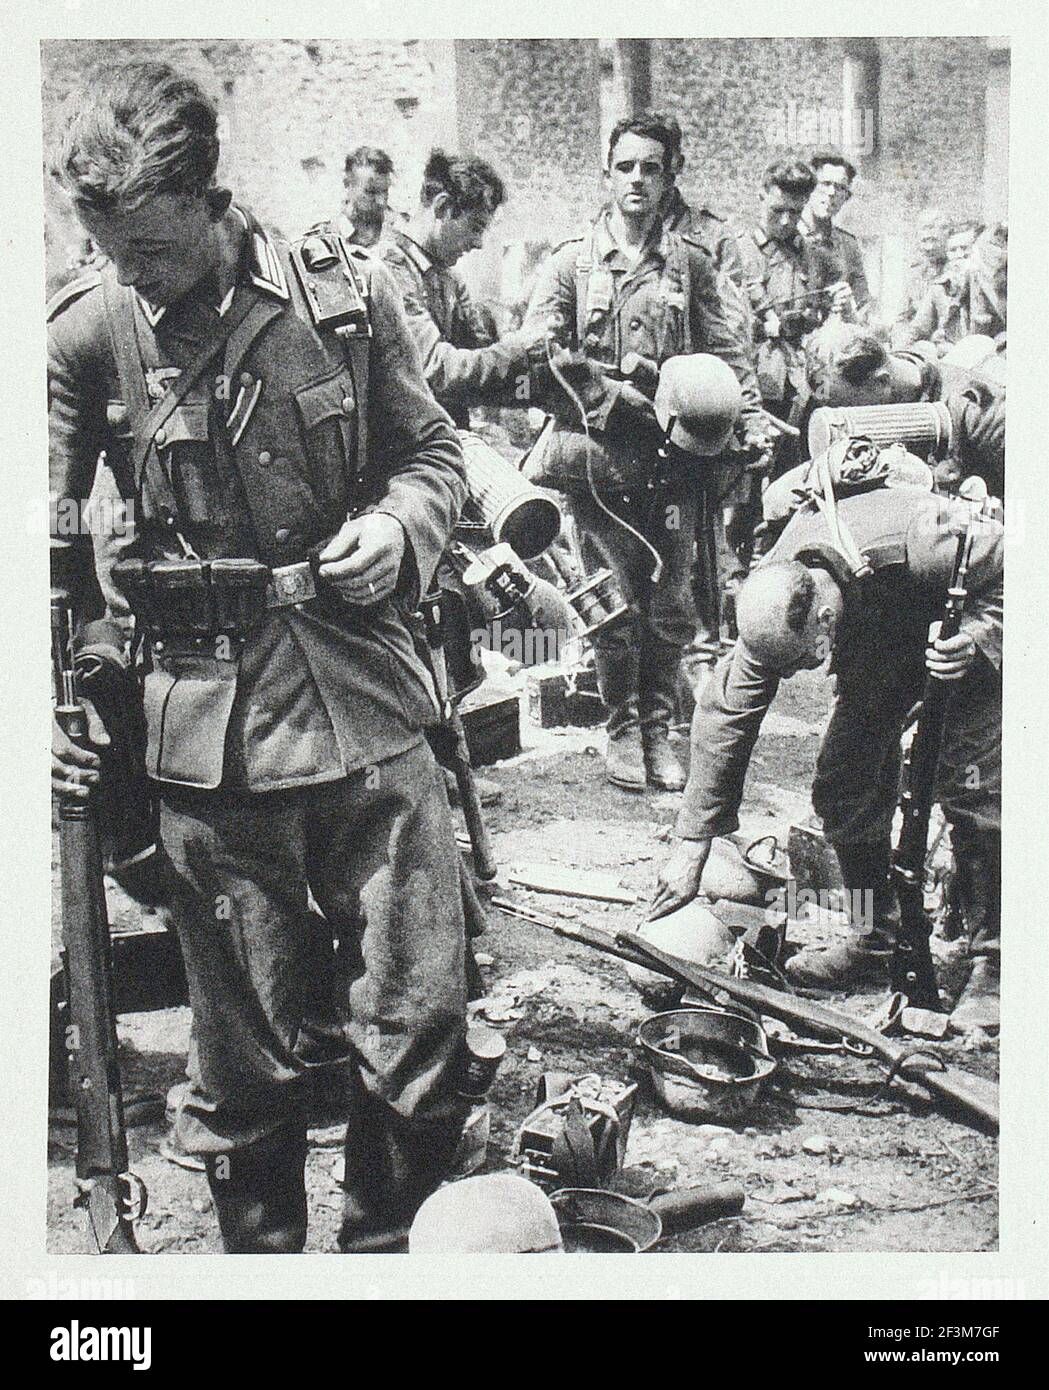 World War II period from German propaganda news. Battle of France. German soldiers during the victory march in France. 1940 Stock Photo